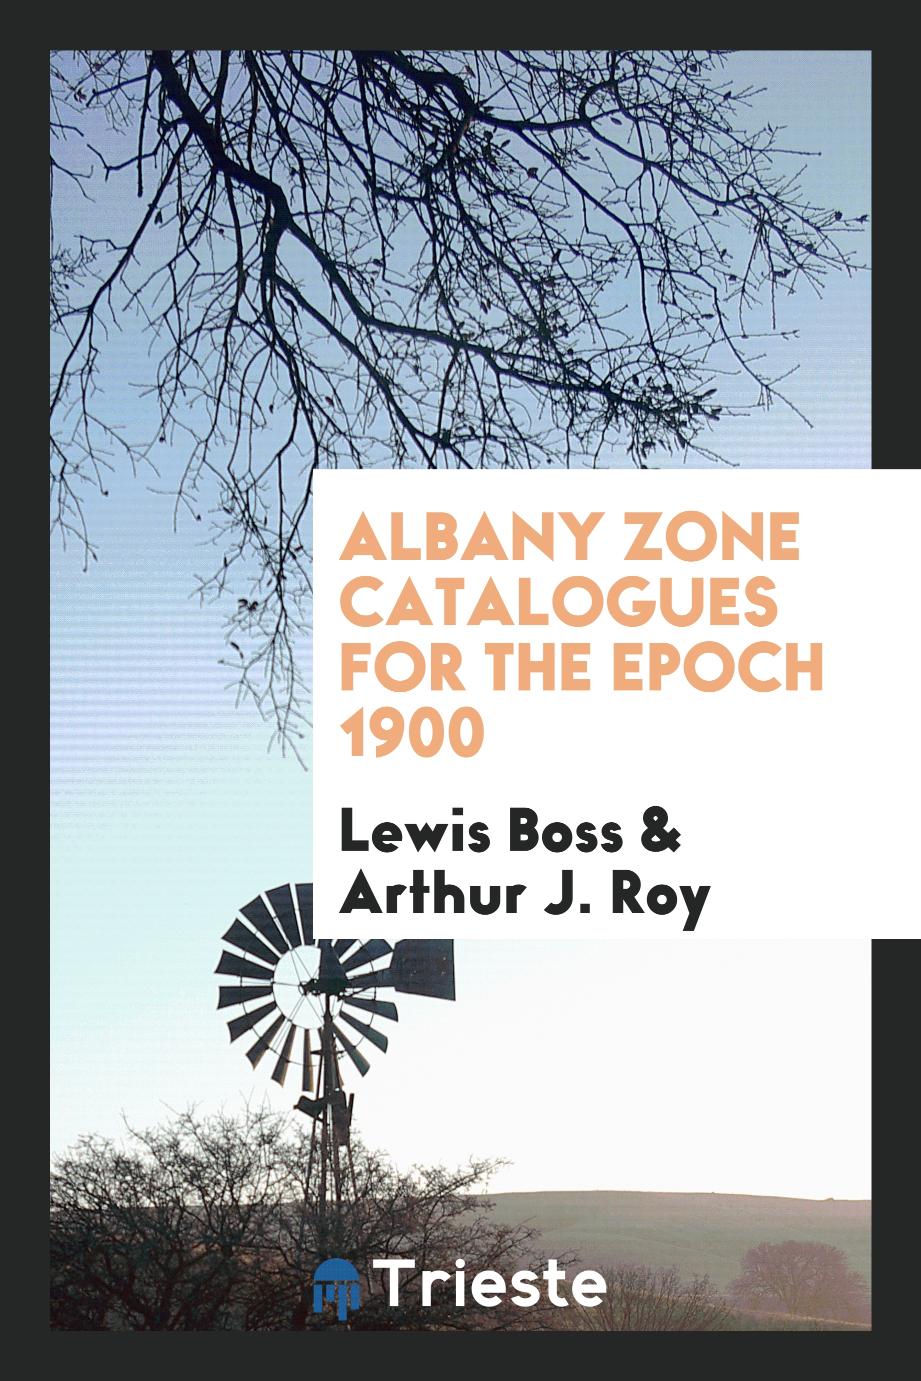 Albany zone catalogues for the epoch 1900